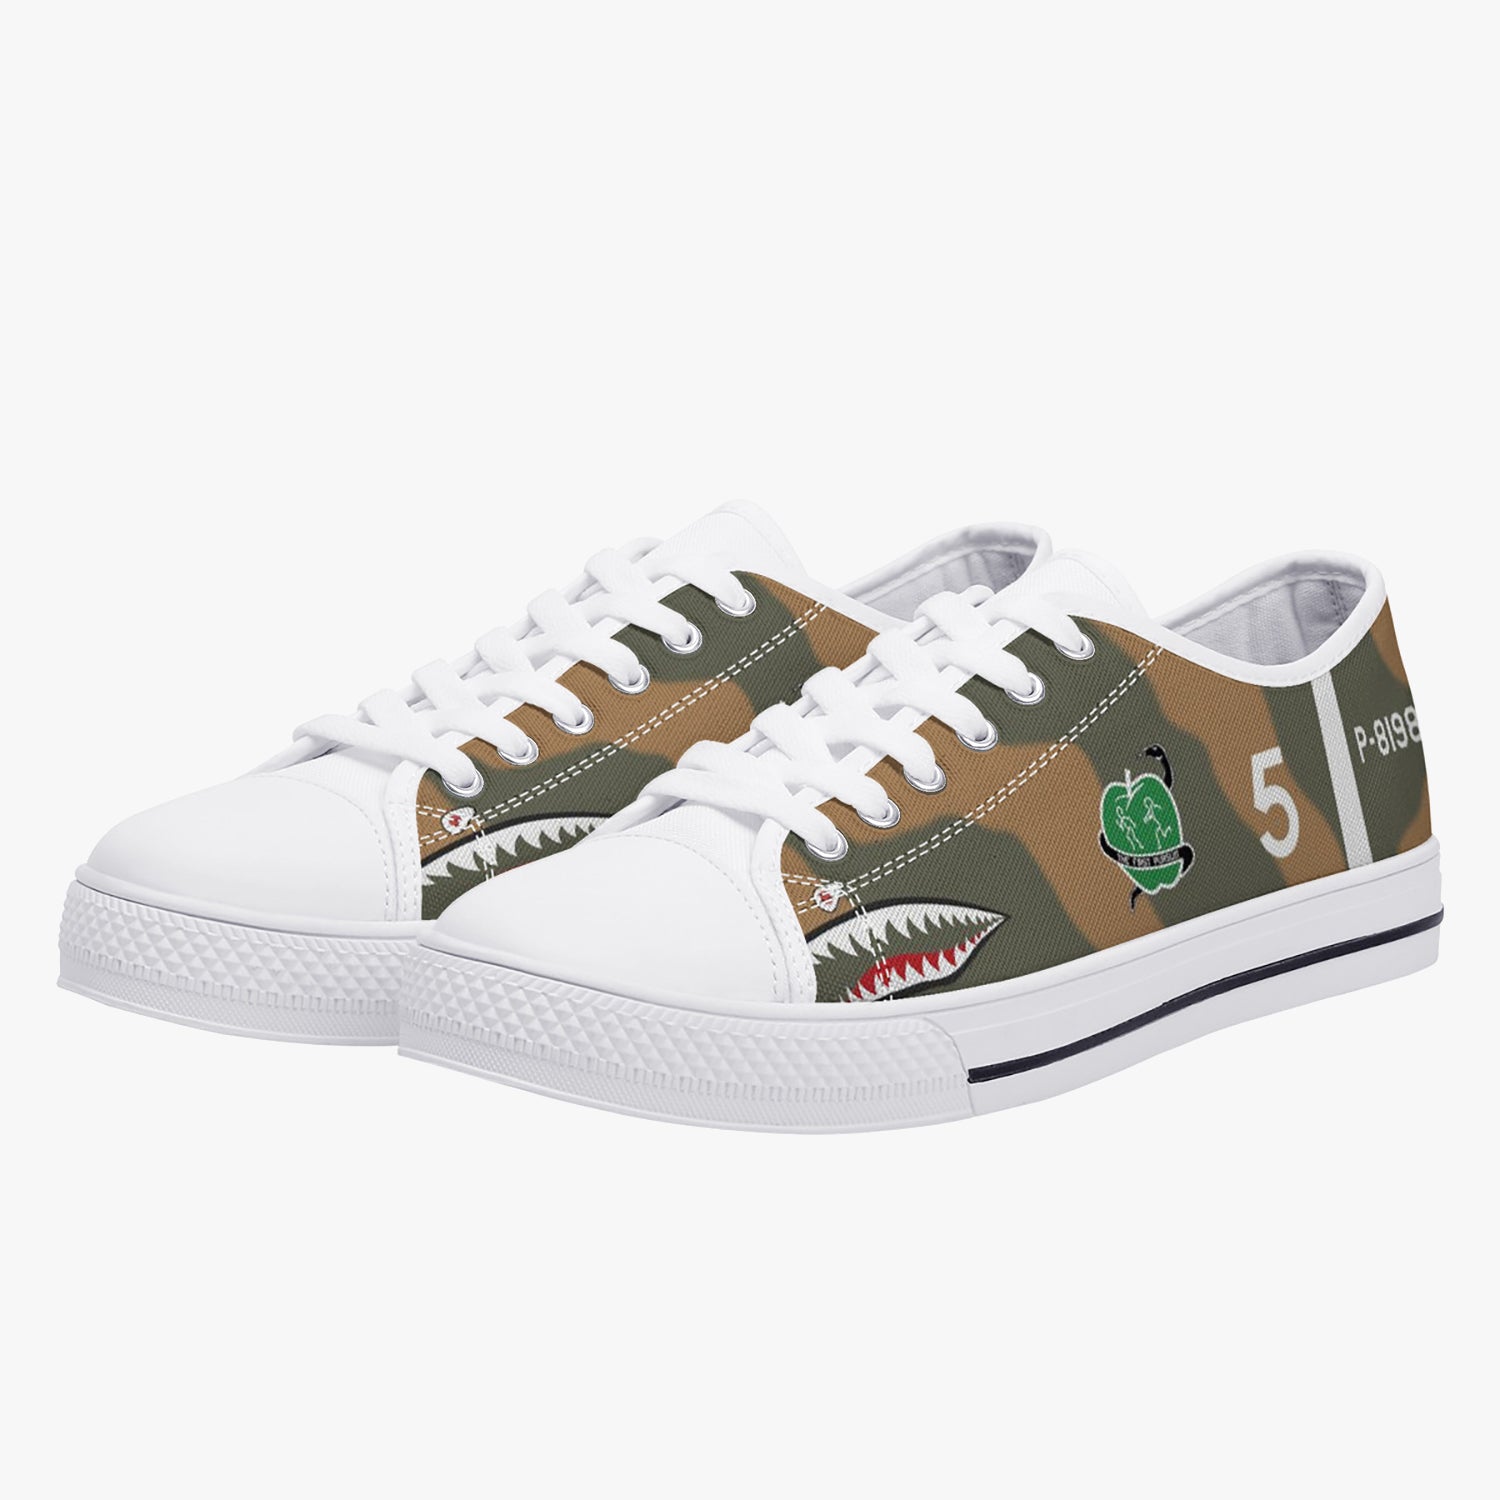 P-40 "White #5" of Charles Bond Low Top Canvas Shoes - I Love a Hangar